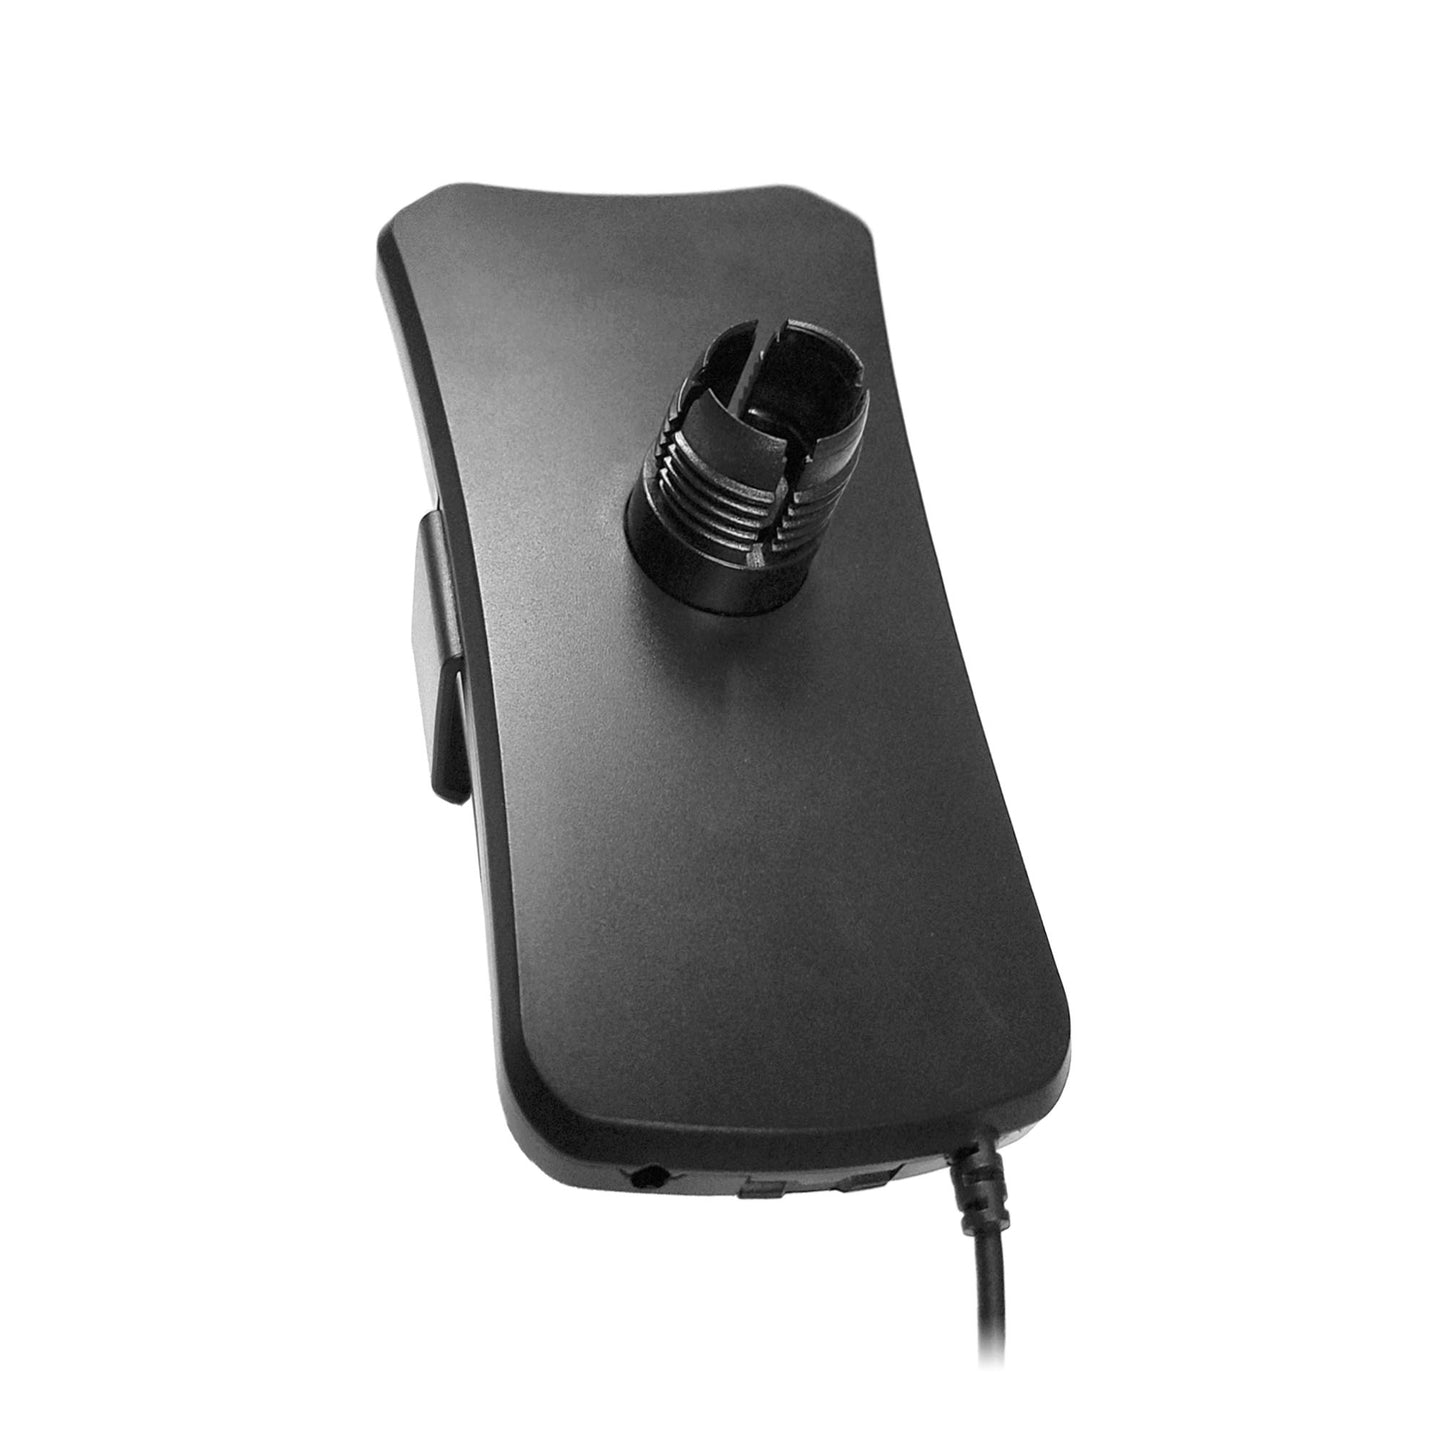 SureCall Black Universal Phone Cradle Antenna w/ FME-Male Connector - 15-05337